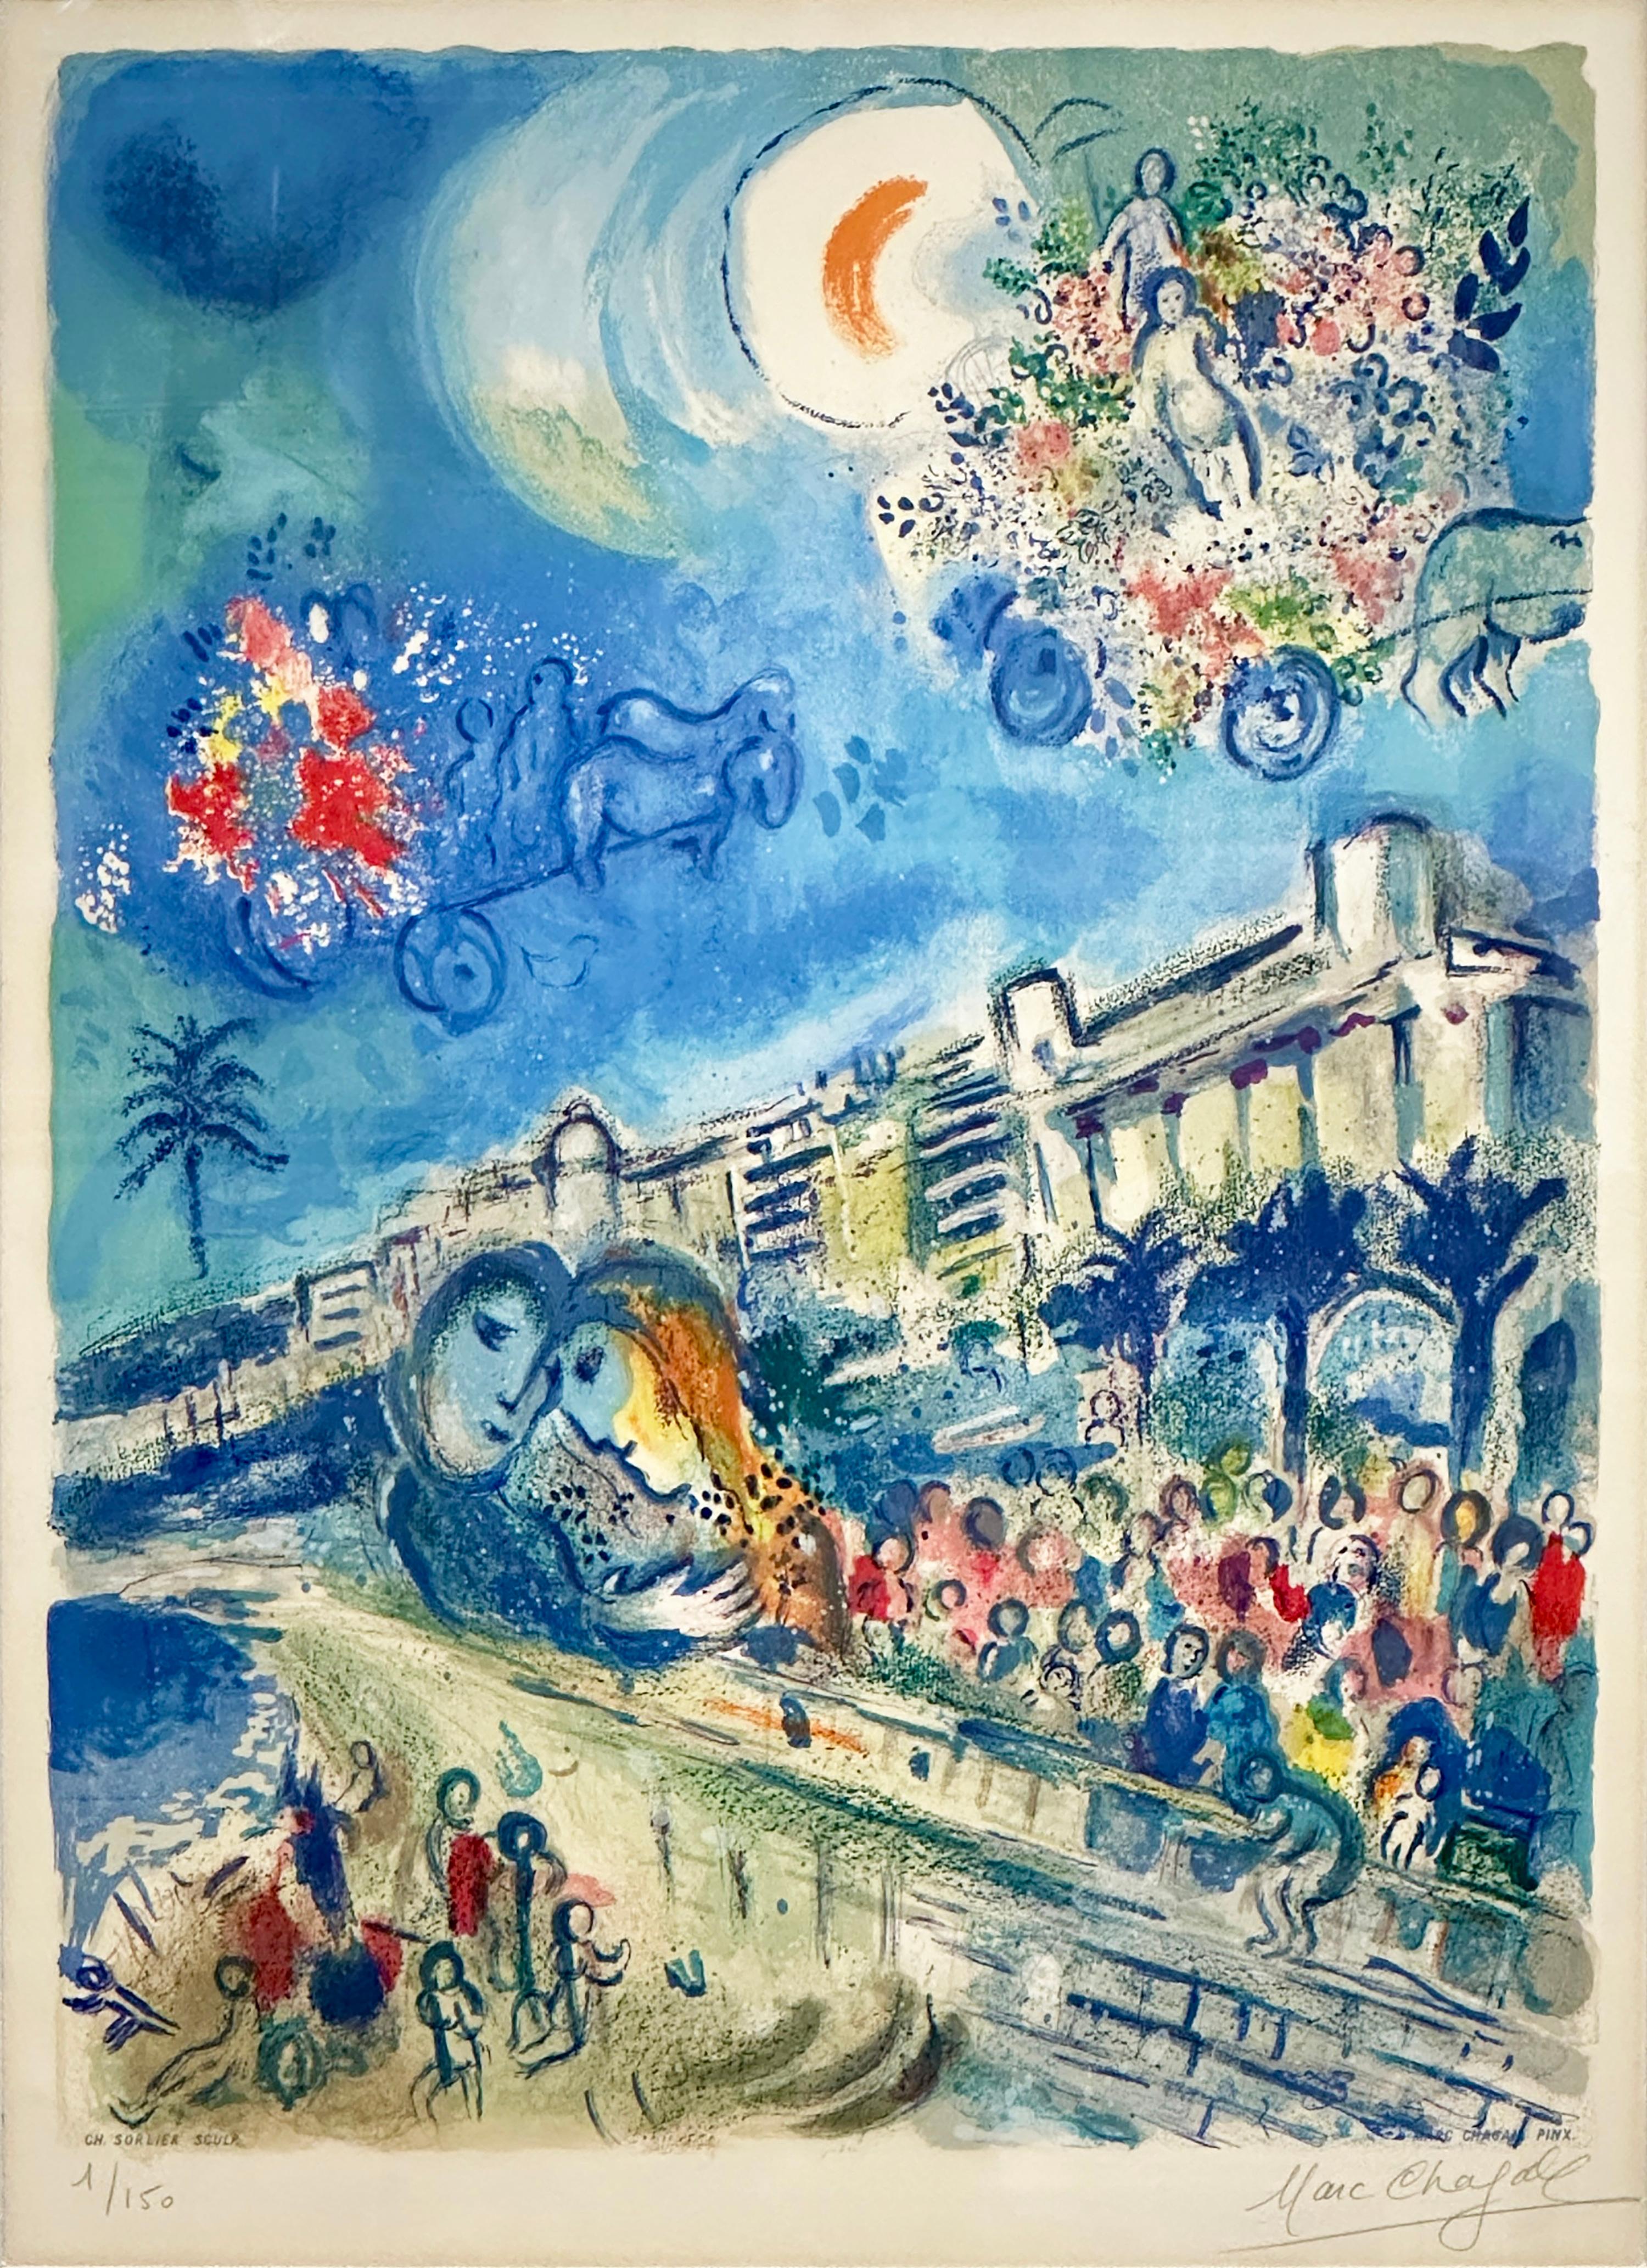 Marc Chagall Figurative Print - Bataille de Fleurs (Carnaval of Flowers) from Nice and the Côte d’Azur